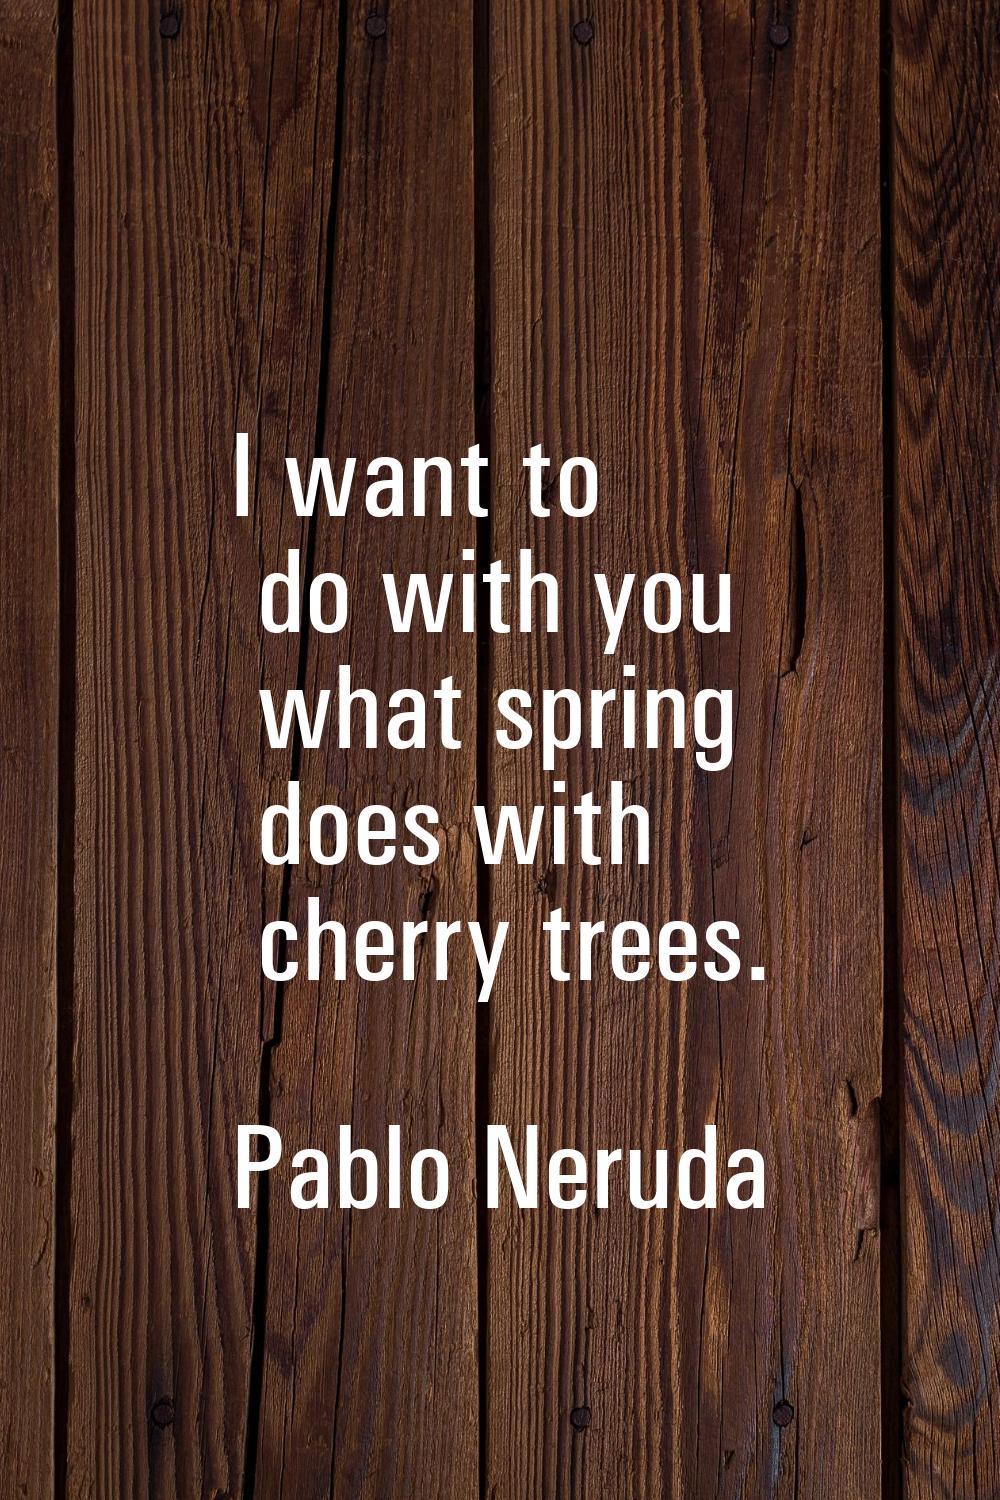 I want to do with you what spring does with cherry trees.